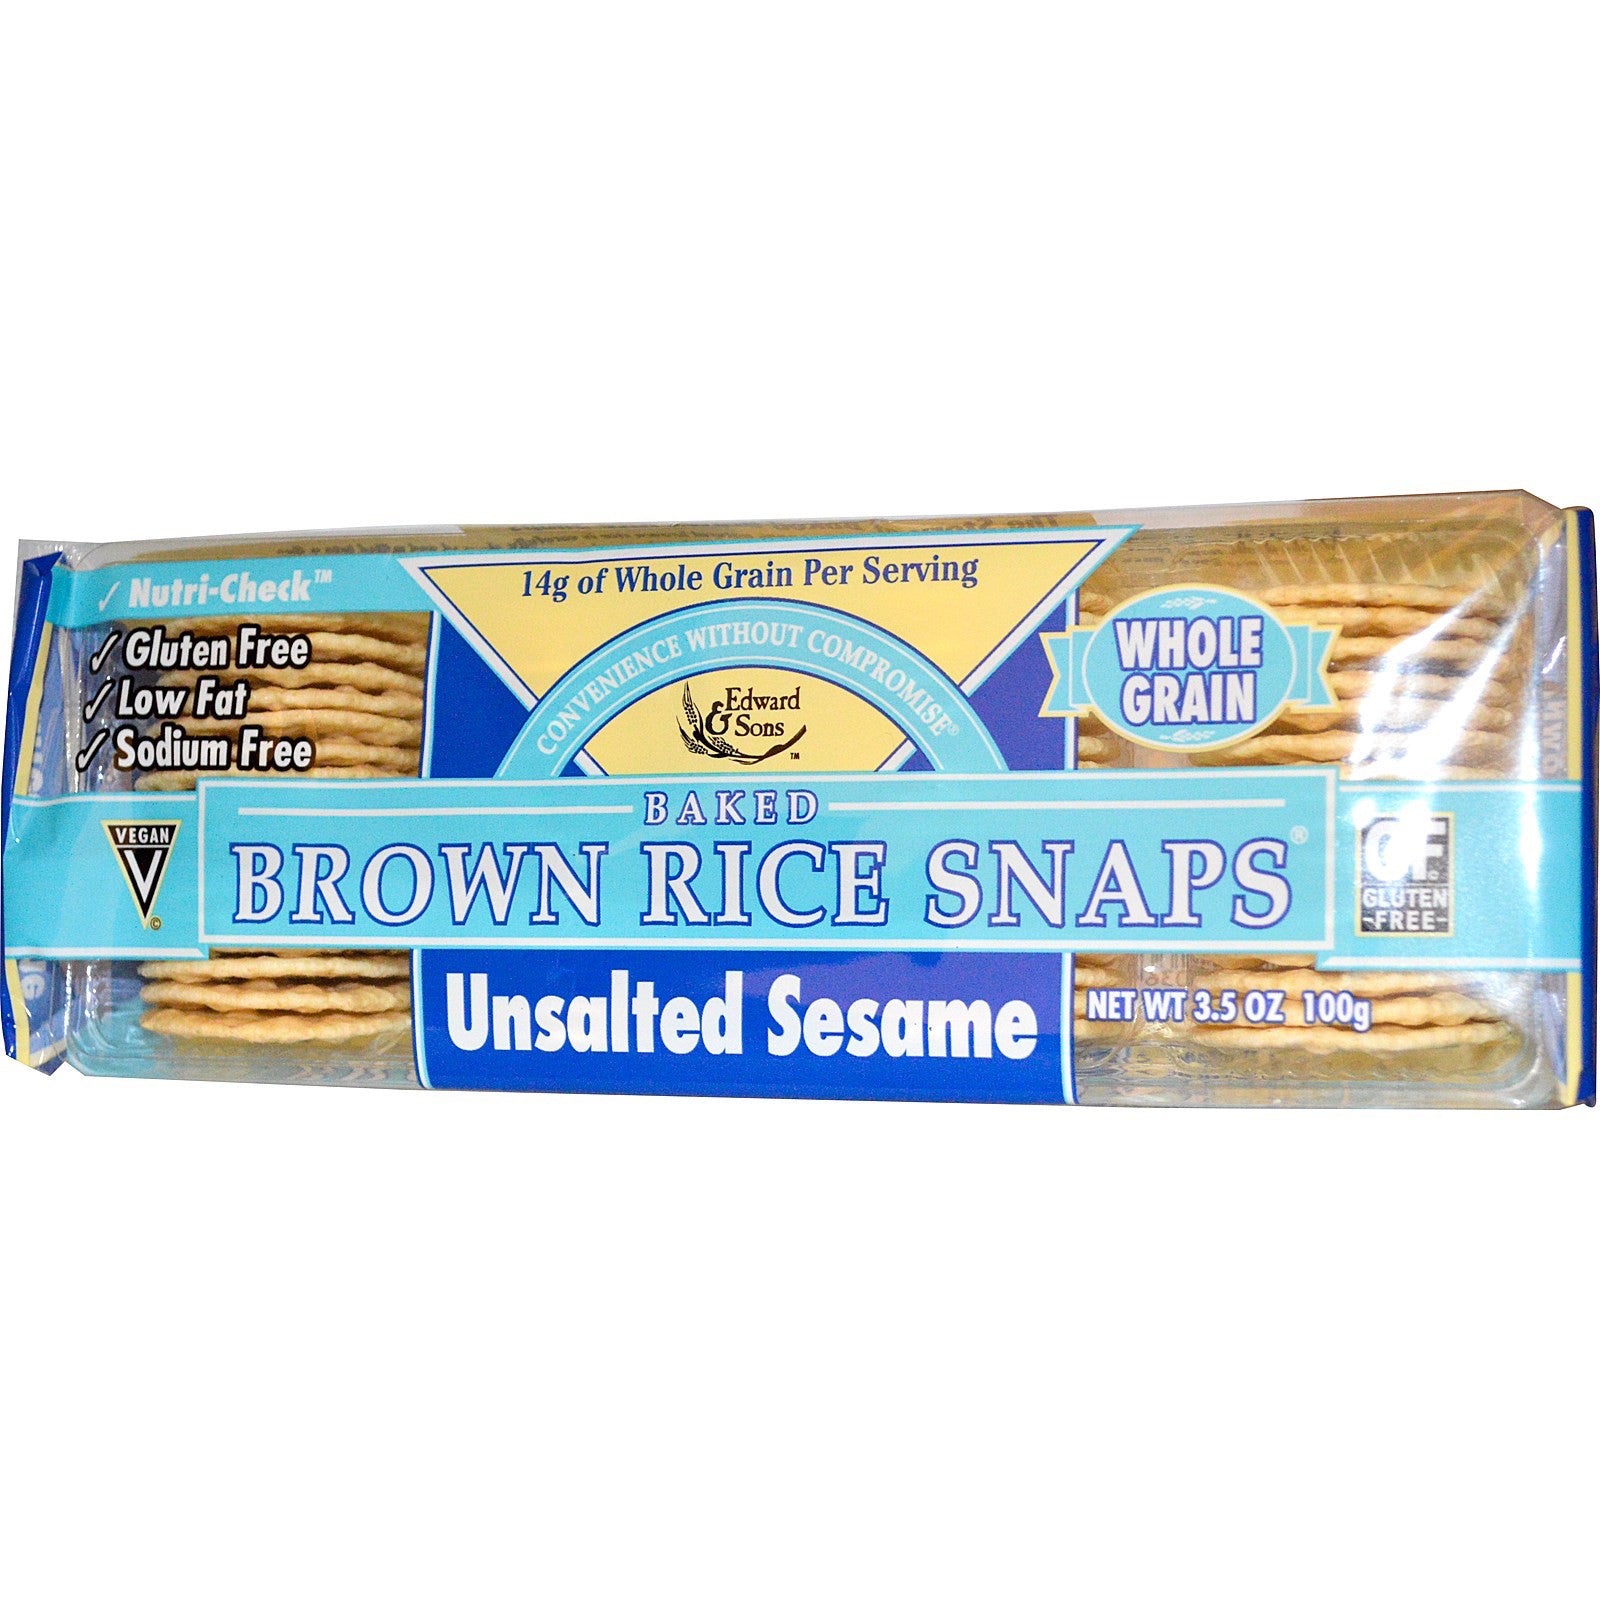 Edward & Sons, Baked Brown Rice Snaps, Unsalted Sesame, 3.5 oz